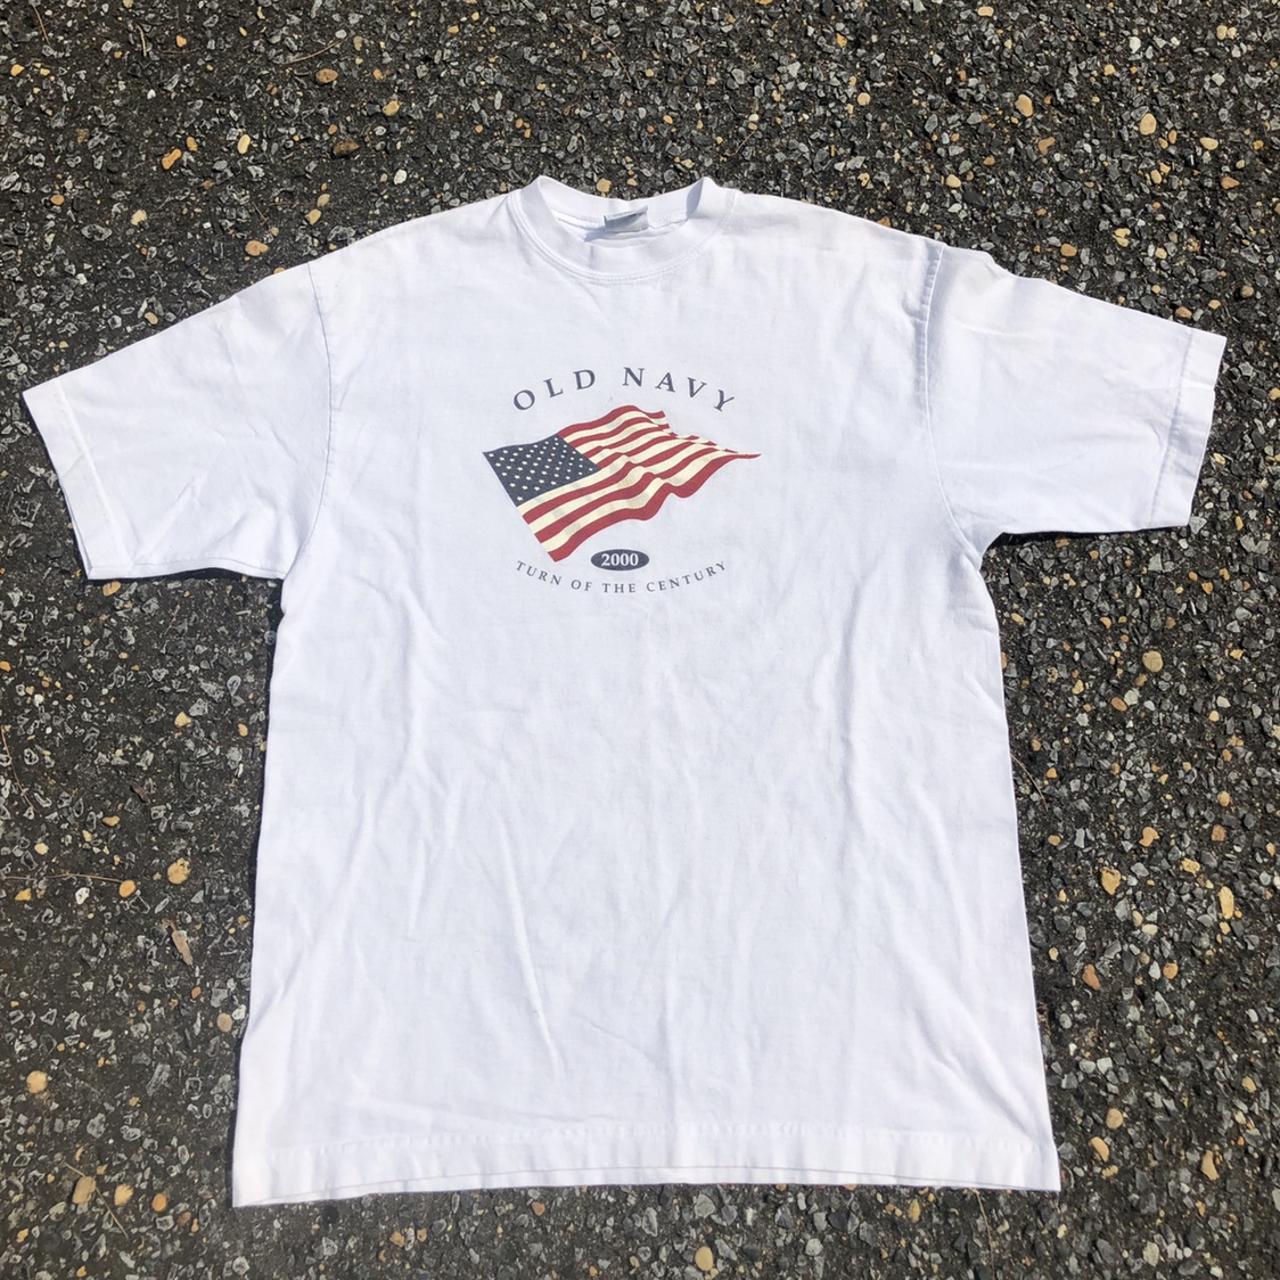 Vintage Old Navy 2000 American Flag Tee Size S, Pit